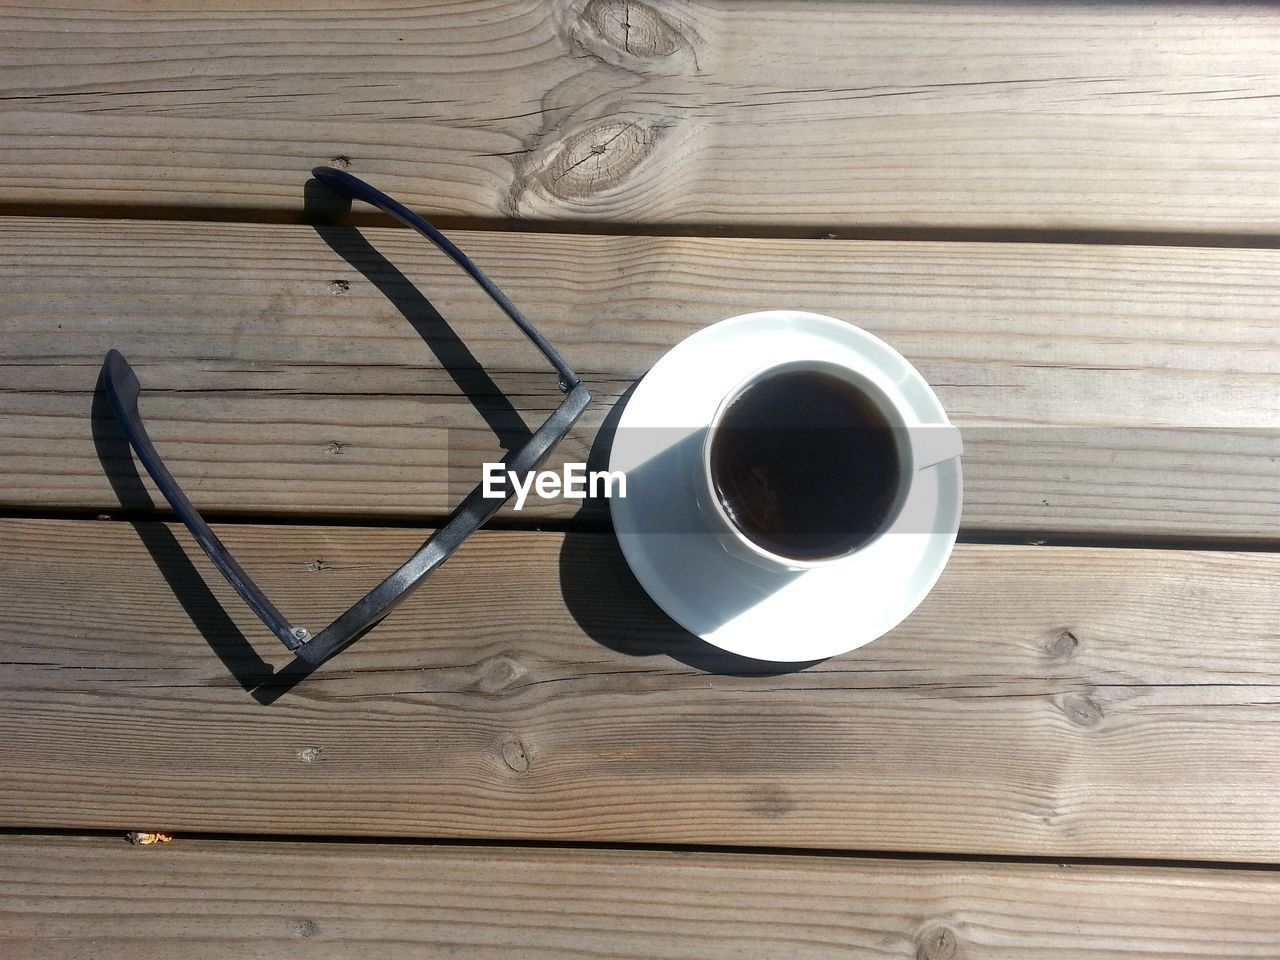 High angle view of coffee cup by eyeglasses on wooden table